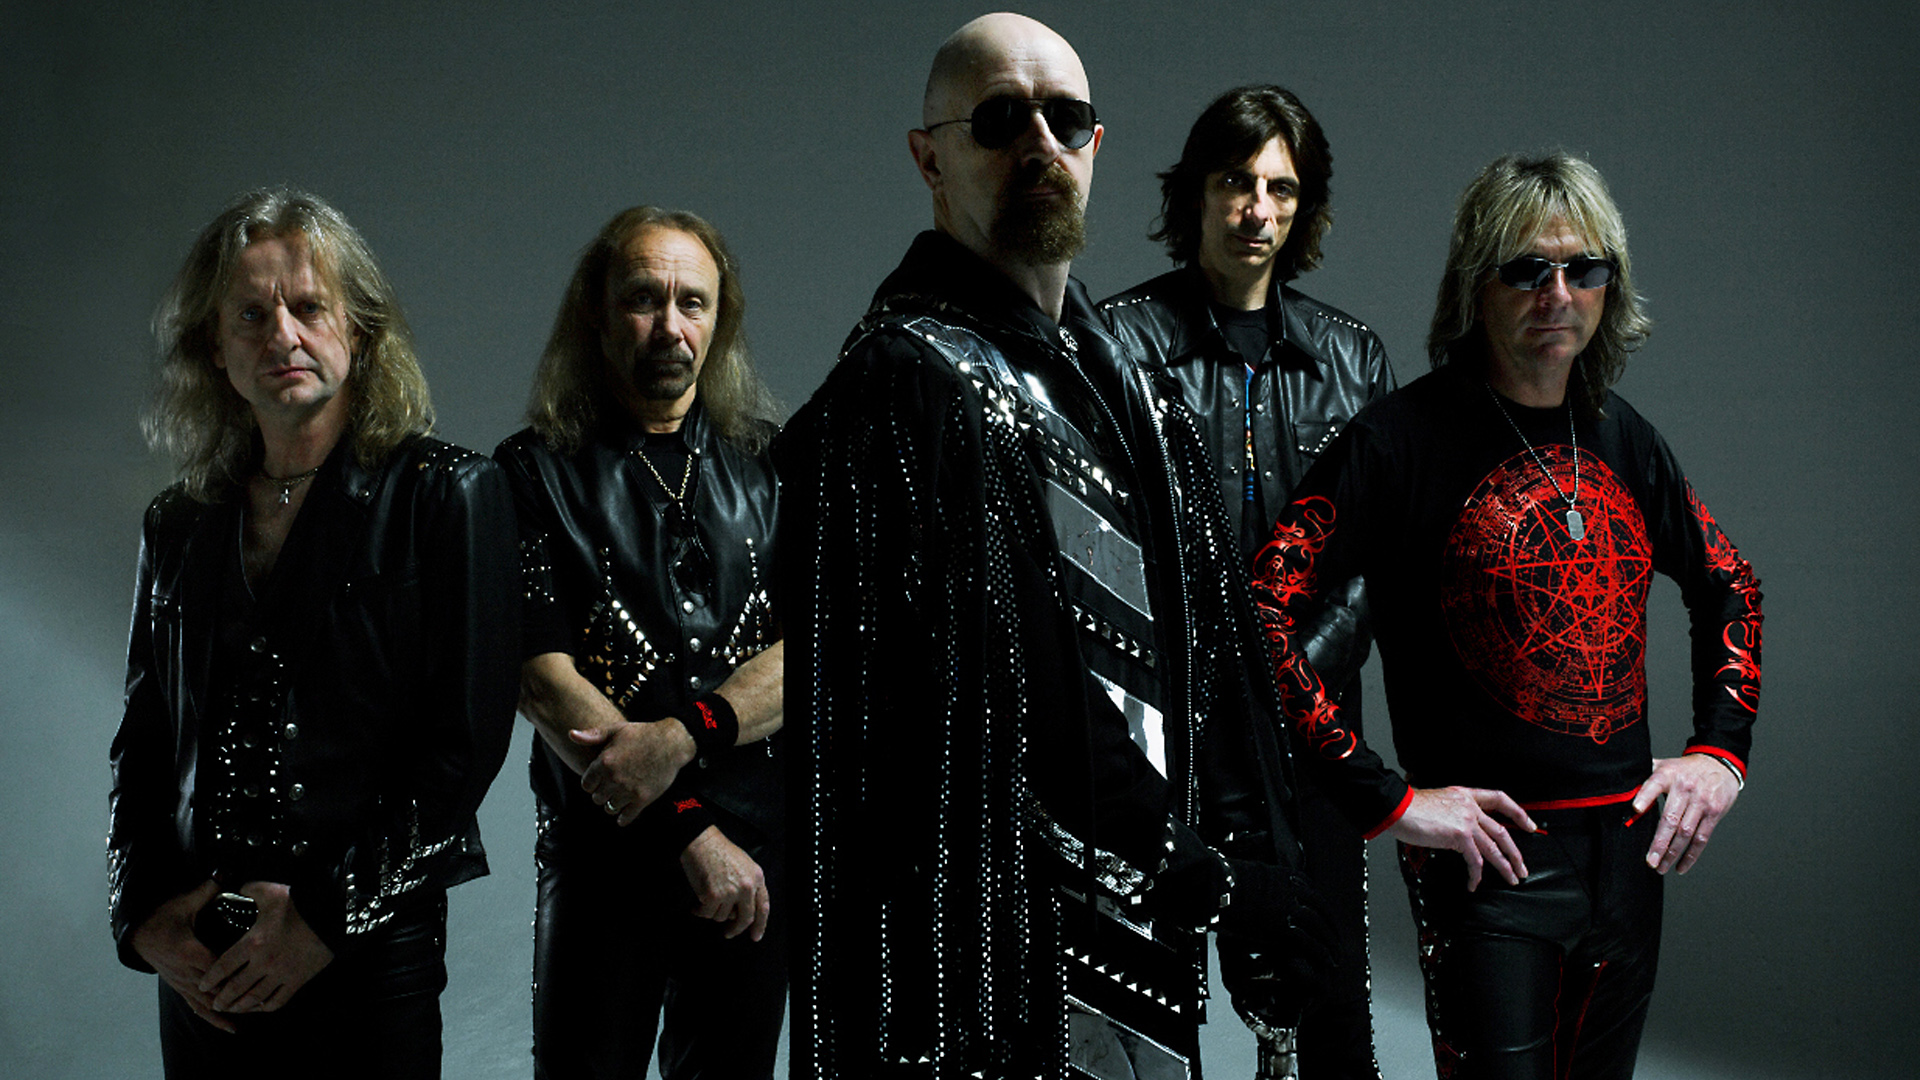 Judas Priest's Rob Halford "Pissed" That the Band Won't be Inducted into the Rock & Roll Hall of Fame as Performers